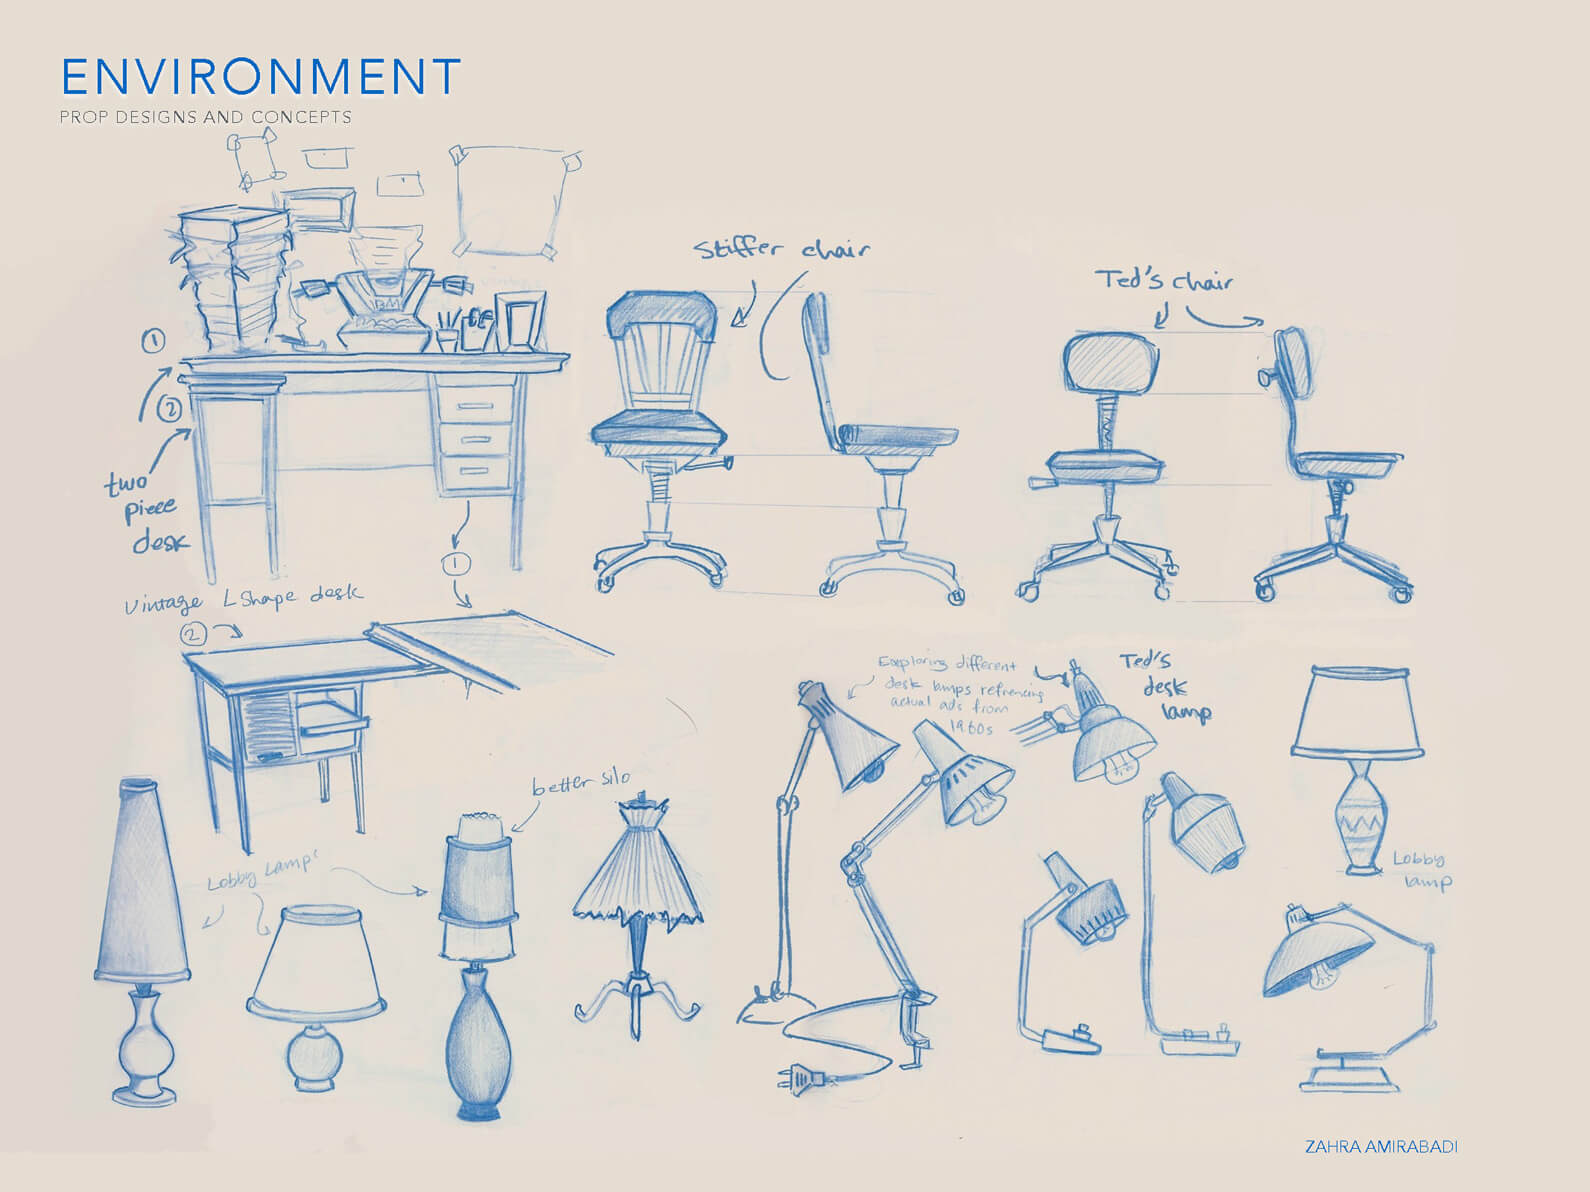 Blue line sketches of concepts for desk, chair, and lamp props for Orientation Center for the Unseen